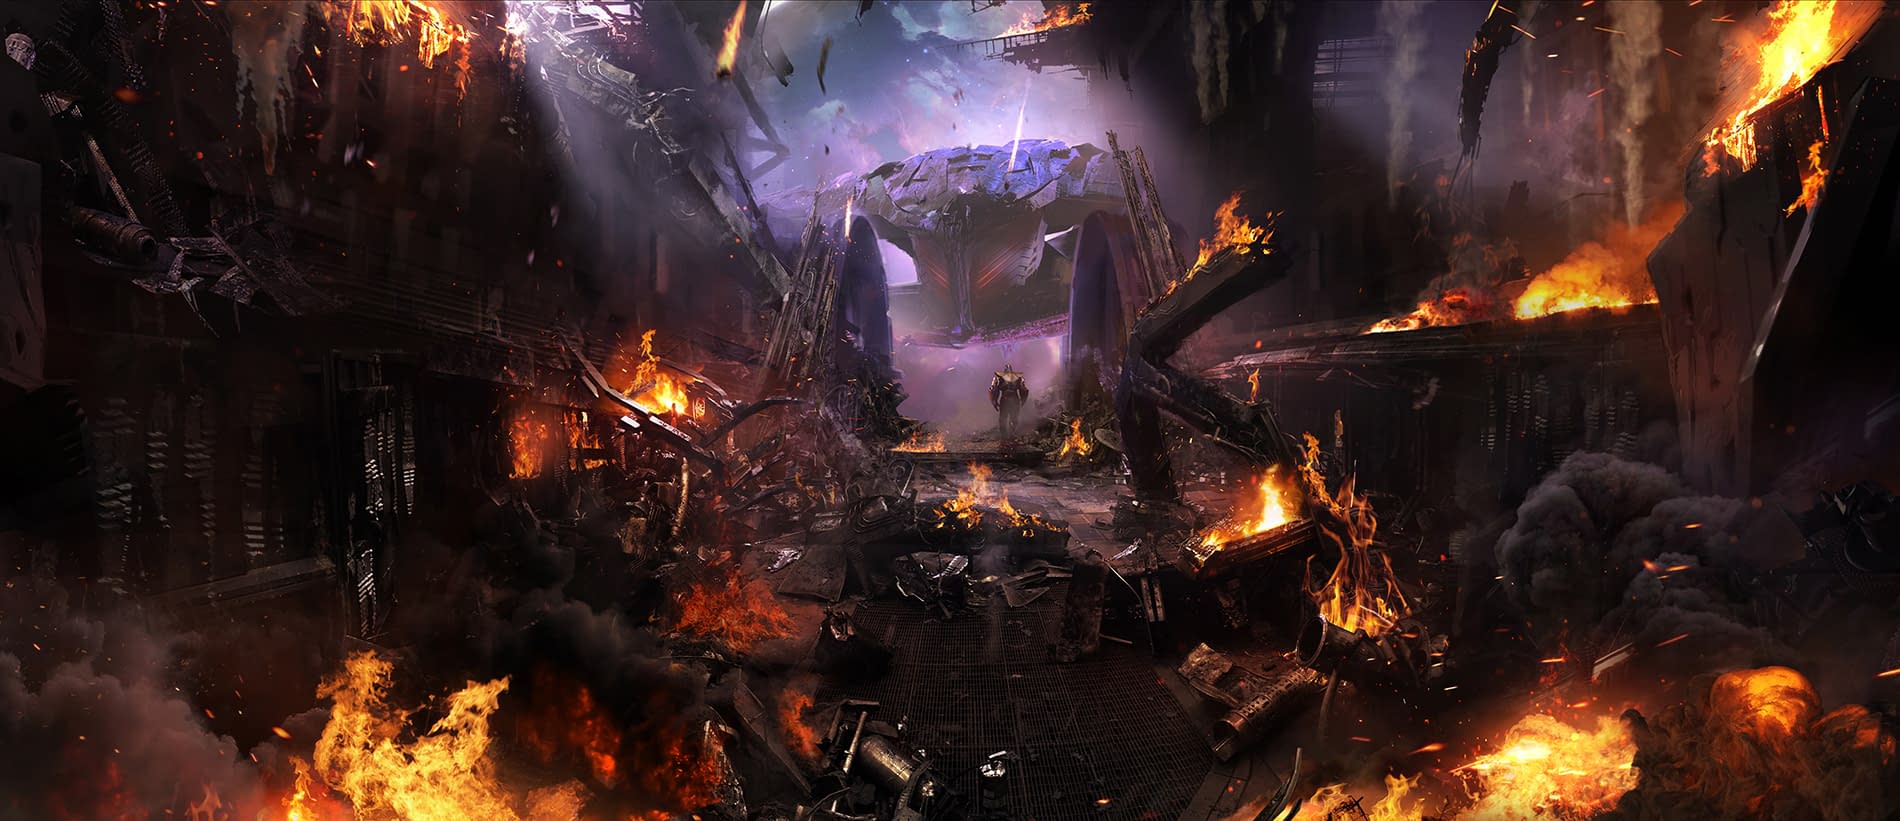 25 Pieces of Concept Art from Avengers: Infinity War